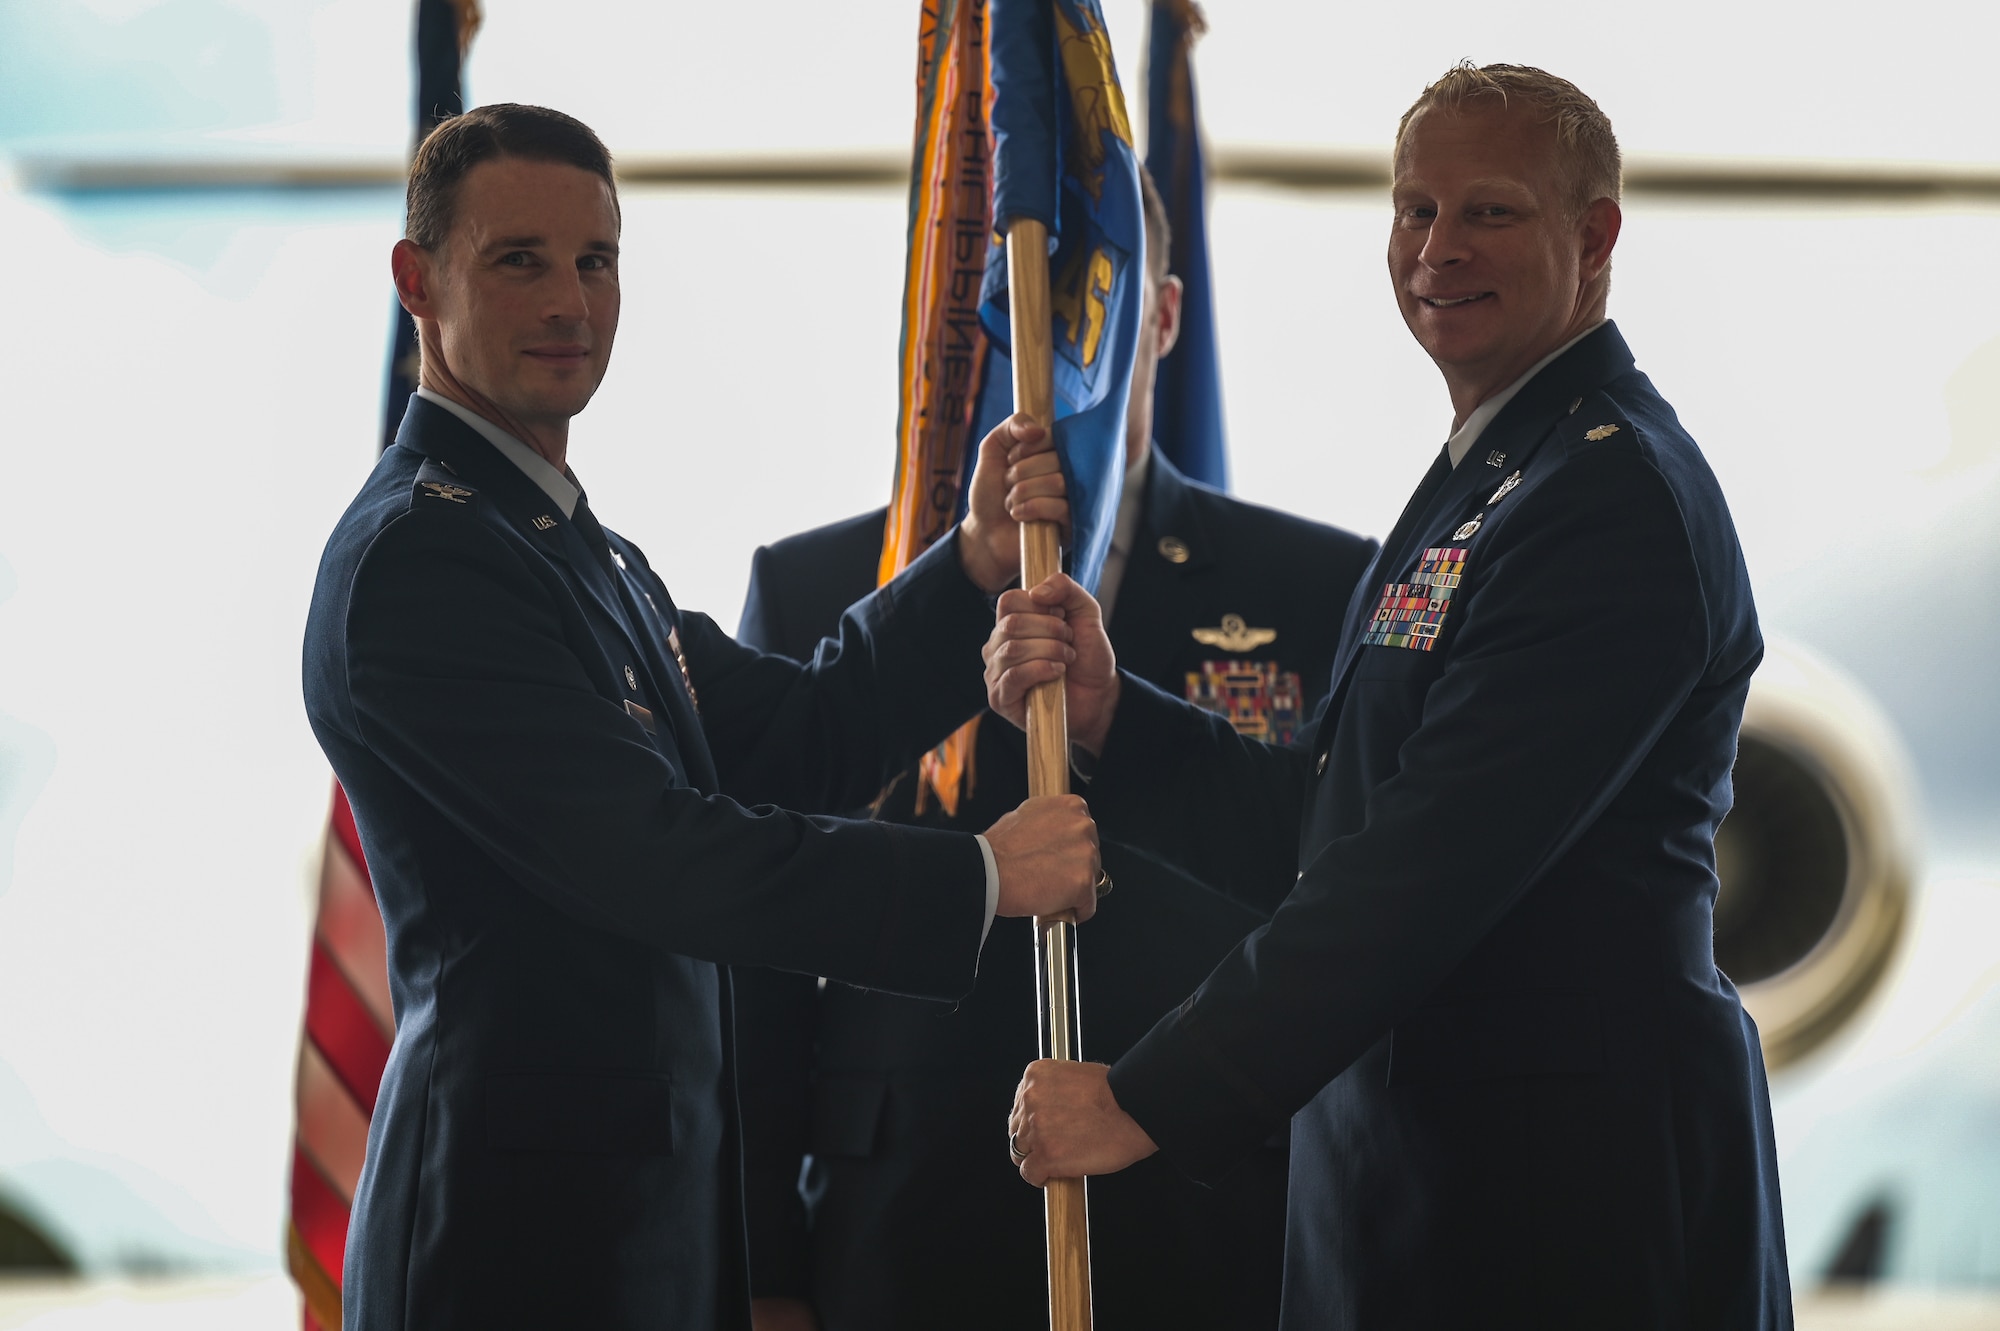 Lt. Col. Daniel Hellinger, 65th Airlift Squadron incoming commander, assumes command of the 65th AS by accepting the guidon from Col. Garrett Fisher, 15th Operations Group commander, during a change of command ceremony at Joint Base Pearl Harbor-Hickam, Hawaii, June 24, 2022. The 65th AS enables global airlift and communication between senior leaders throughout the Indo-Pacific area of responsibility. (U.S. Air Force photo by Staff Sgt. Alan Ricker)